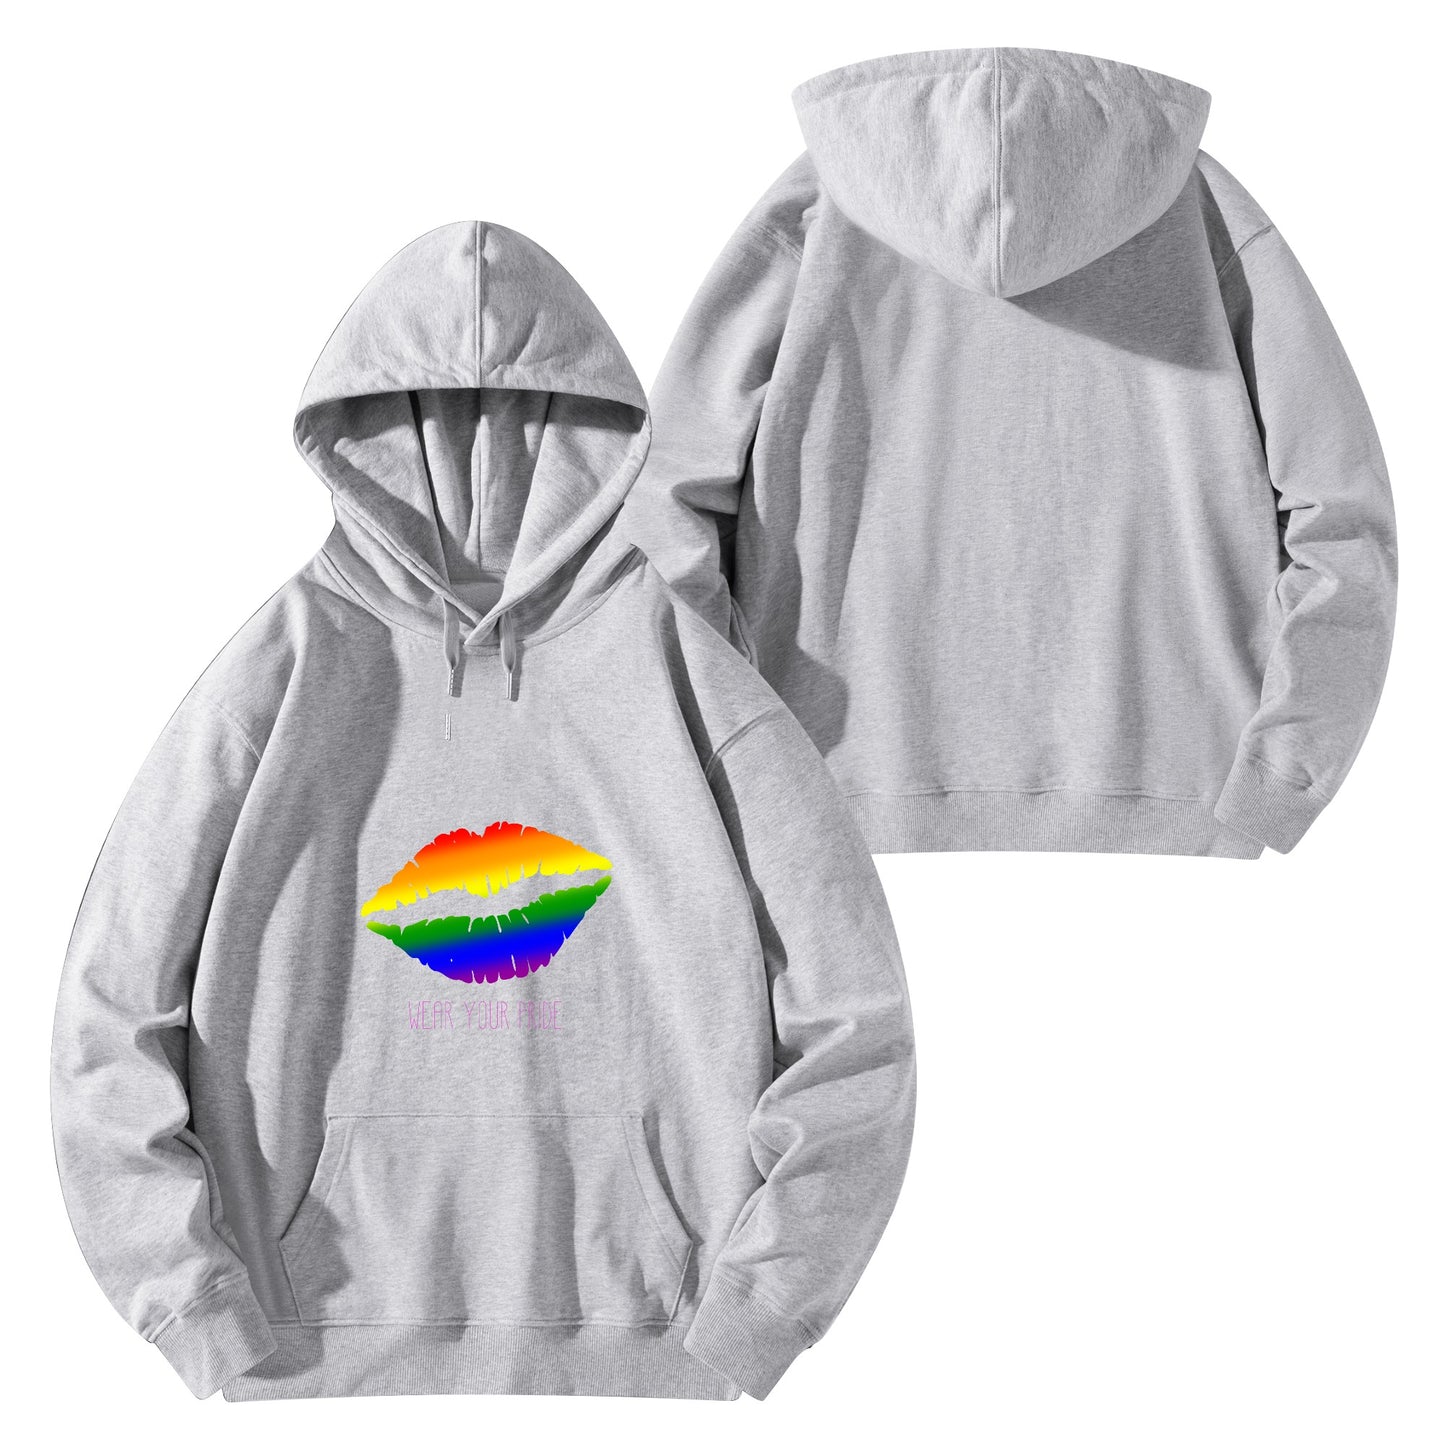 Wear Your Pride LGBTQ+ Adult Cotton Hoodie